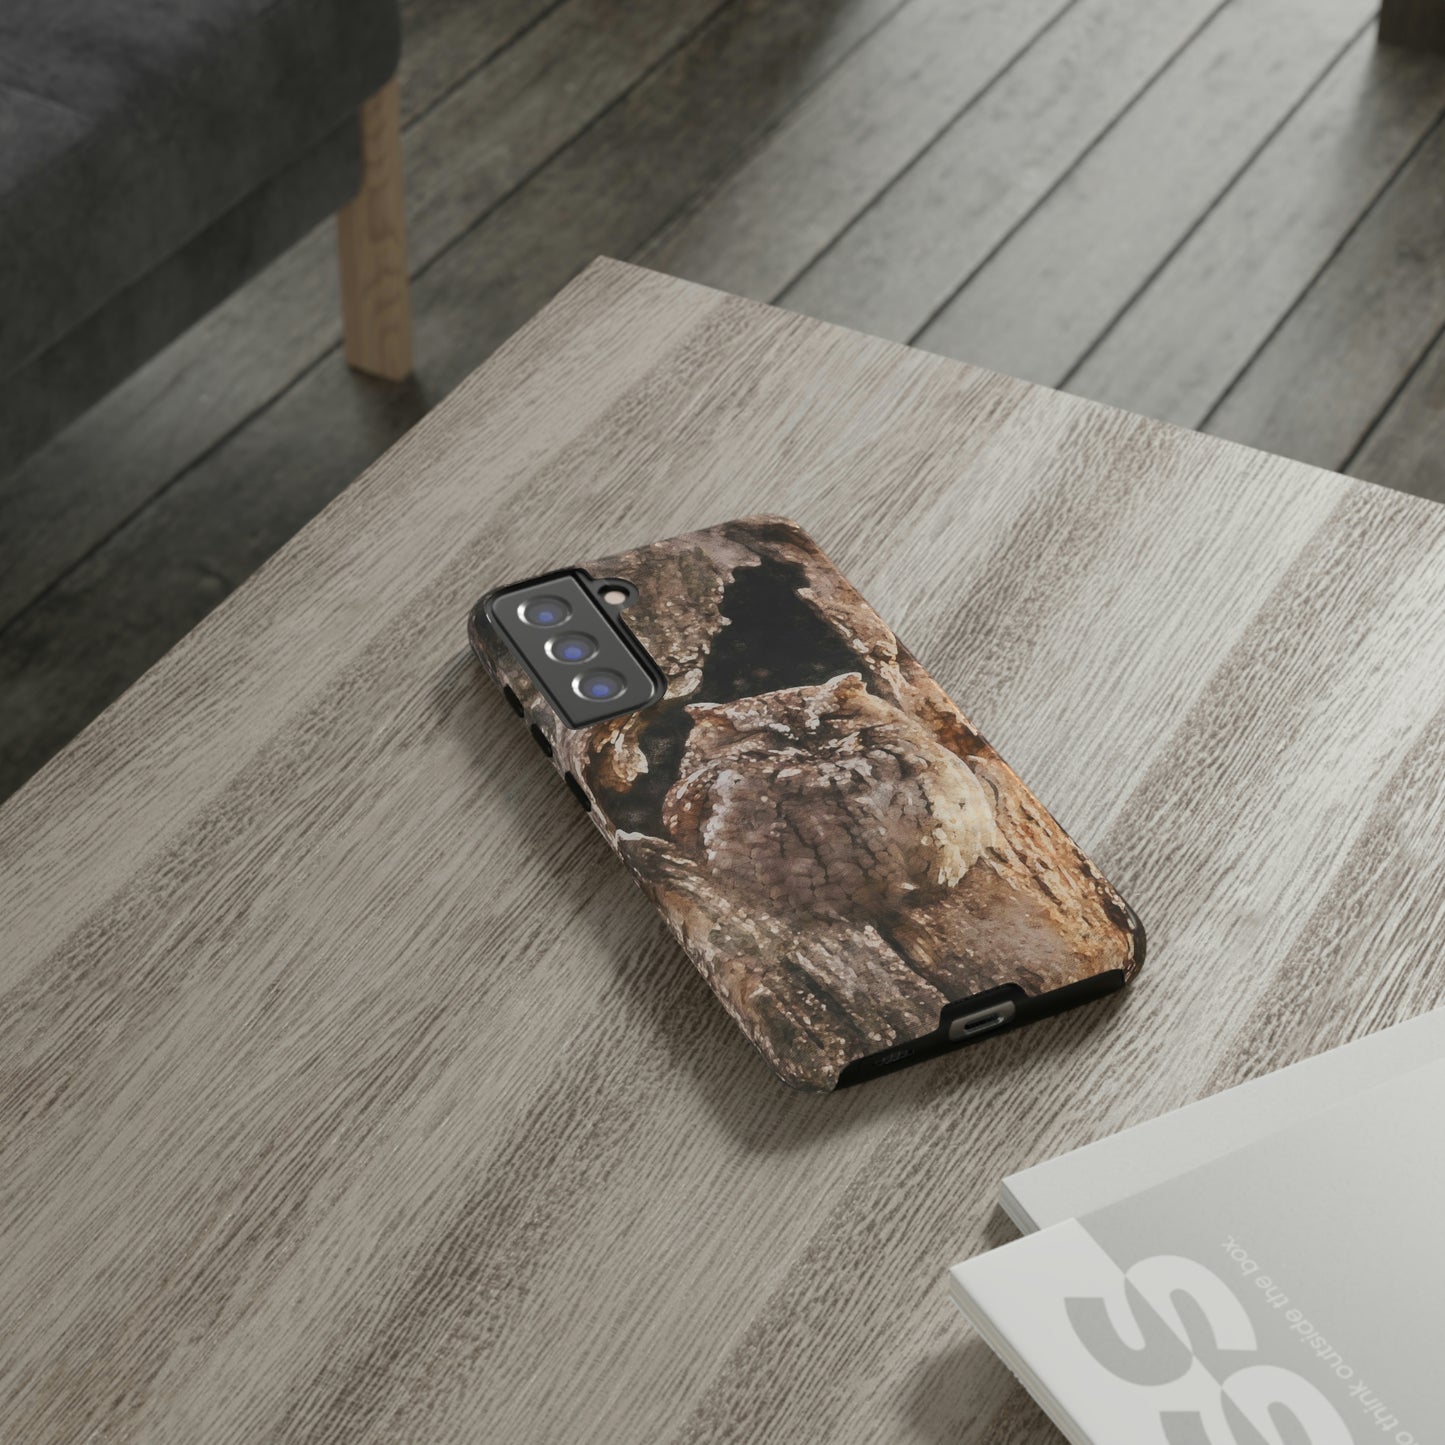 Sleepy Screechy Tough Case for iPhone and Android devices